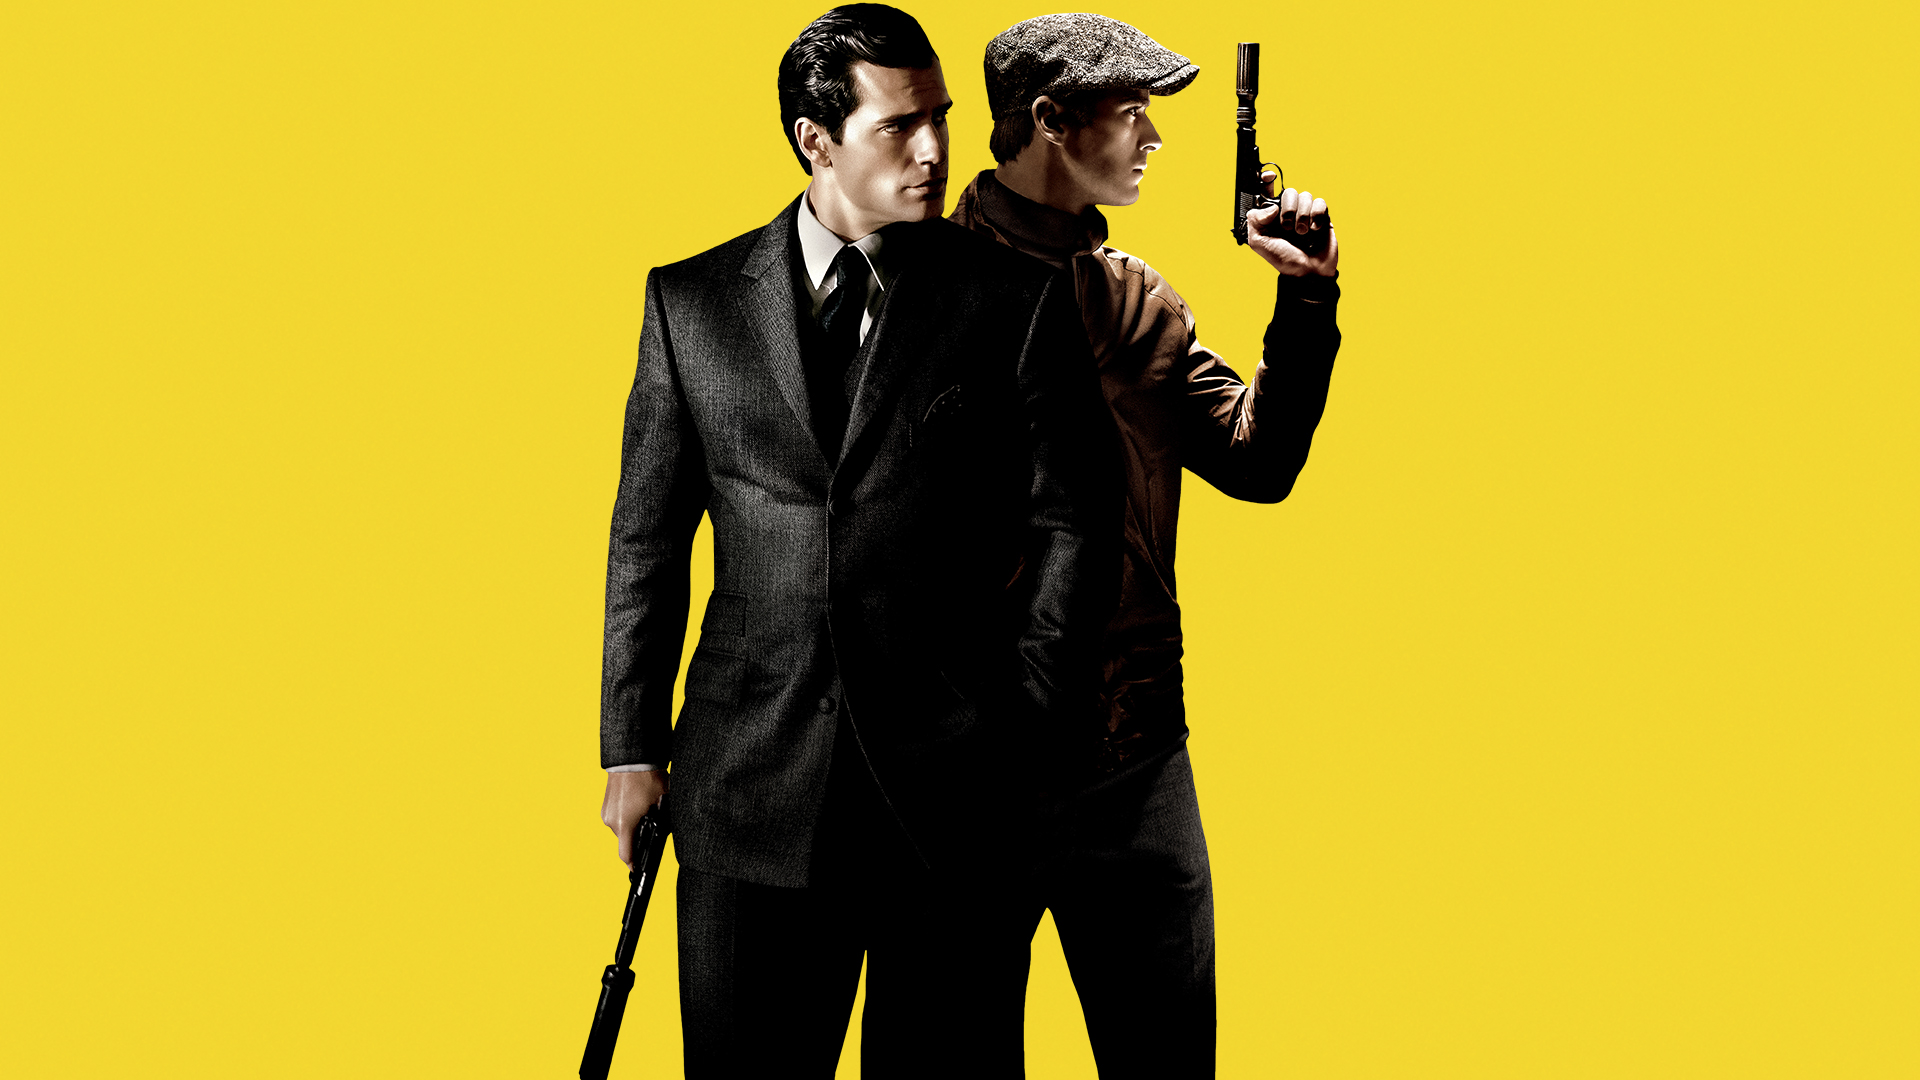 The Man From U N C L E Full HD Wallpaper And Background